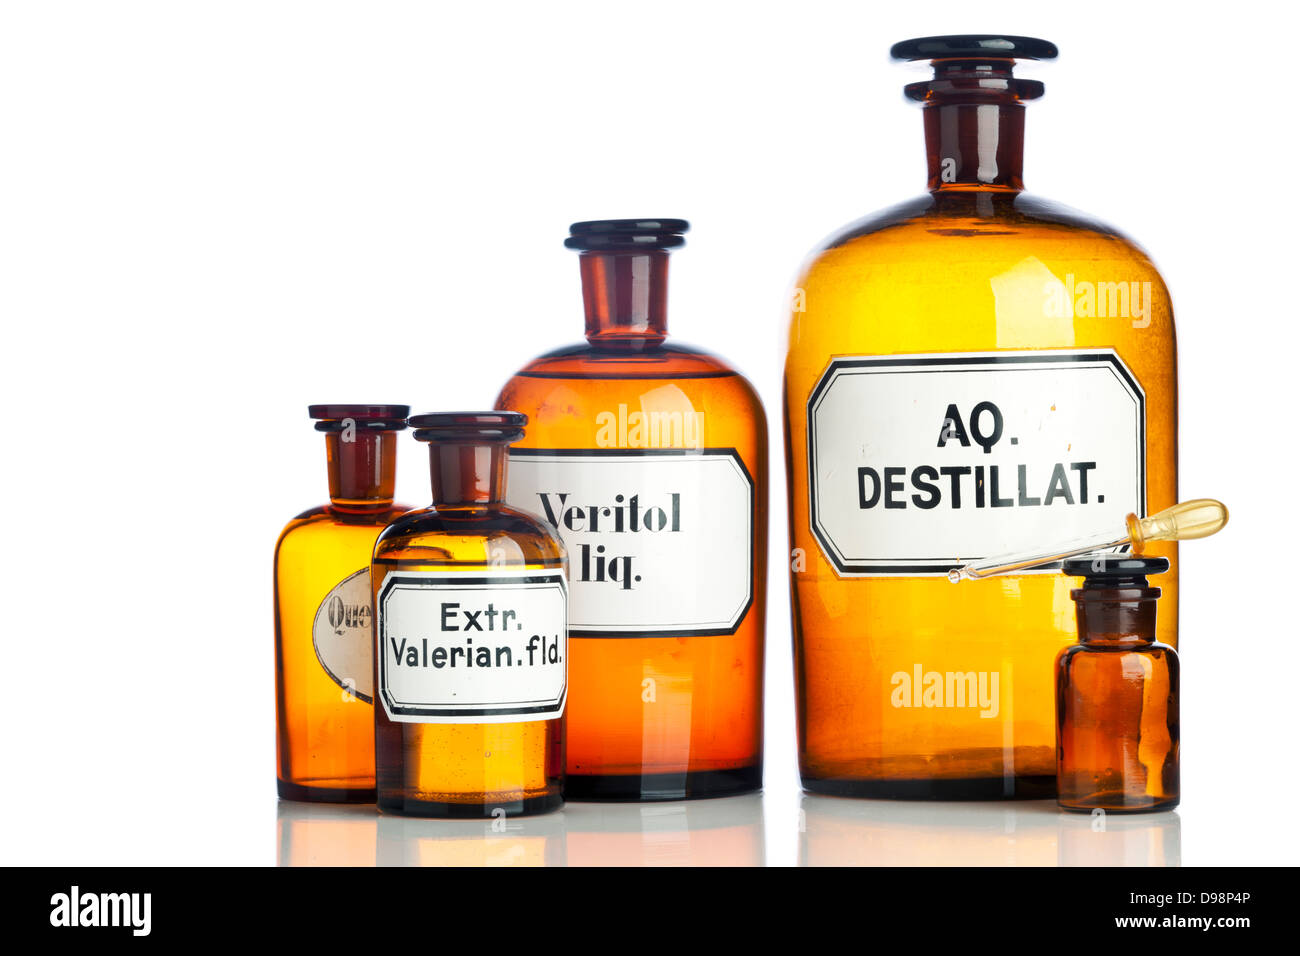 Old pharmacy bottles with latin lettering on labels Stock Photo